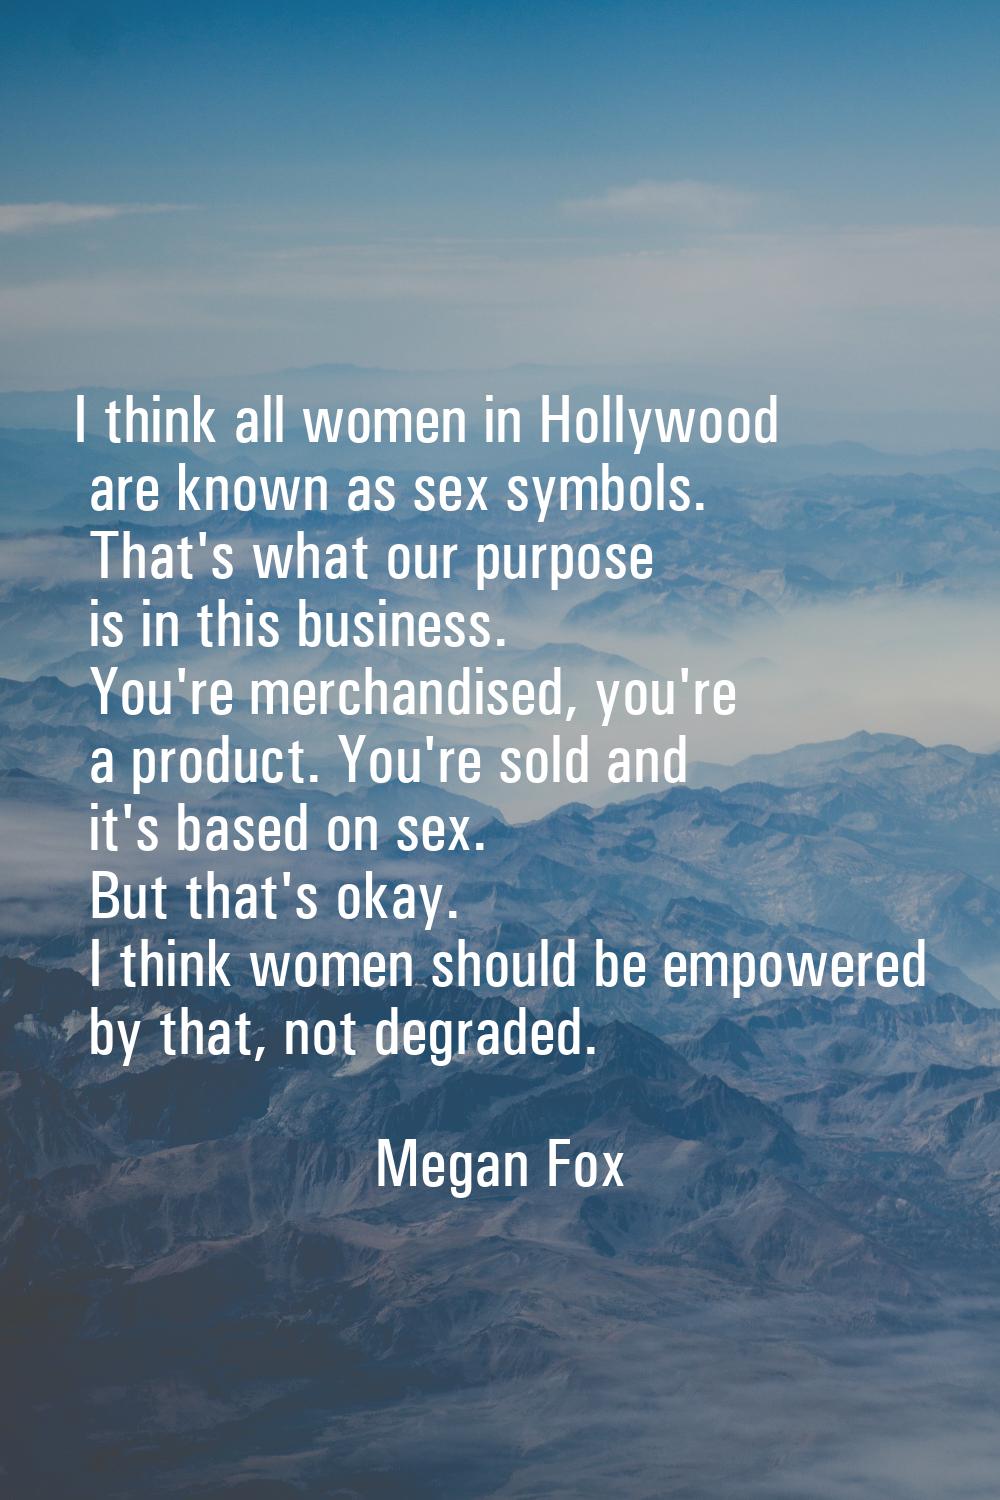 I think all women in Hollywood are known as sex symbols. That's what our purpose is in this busines